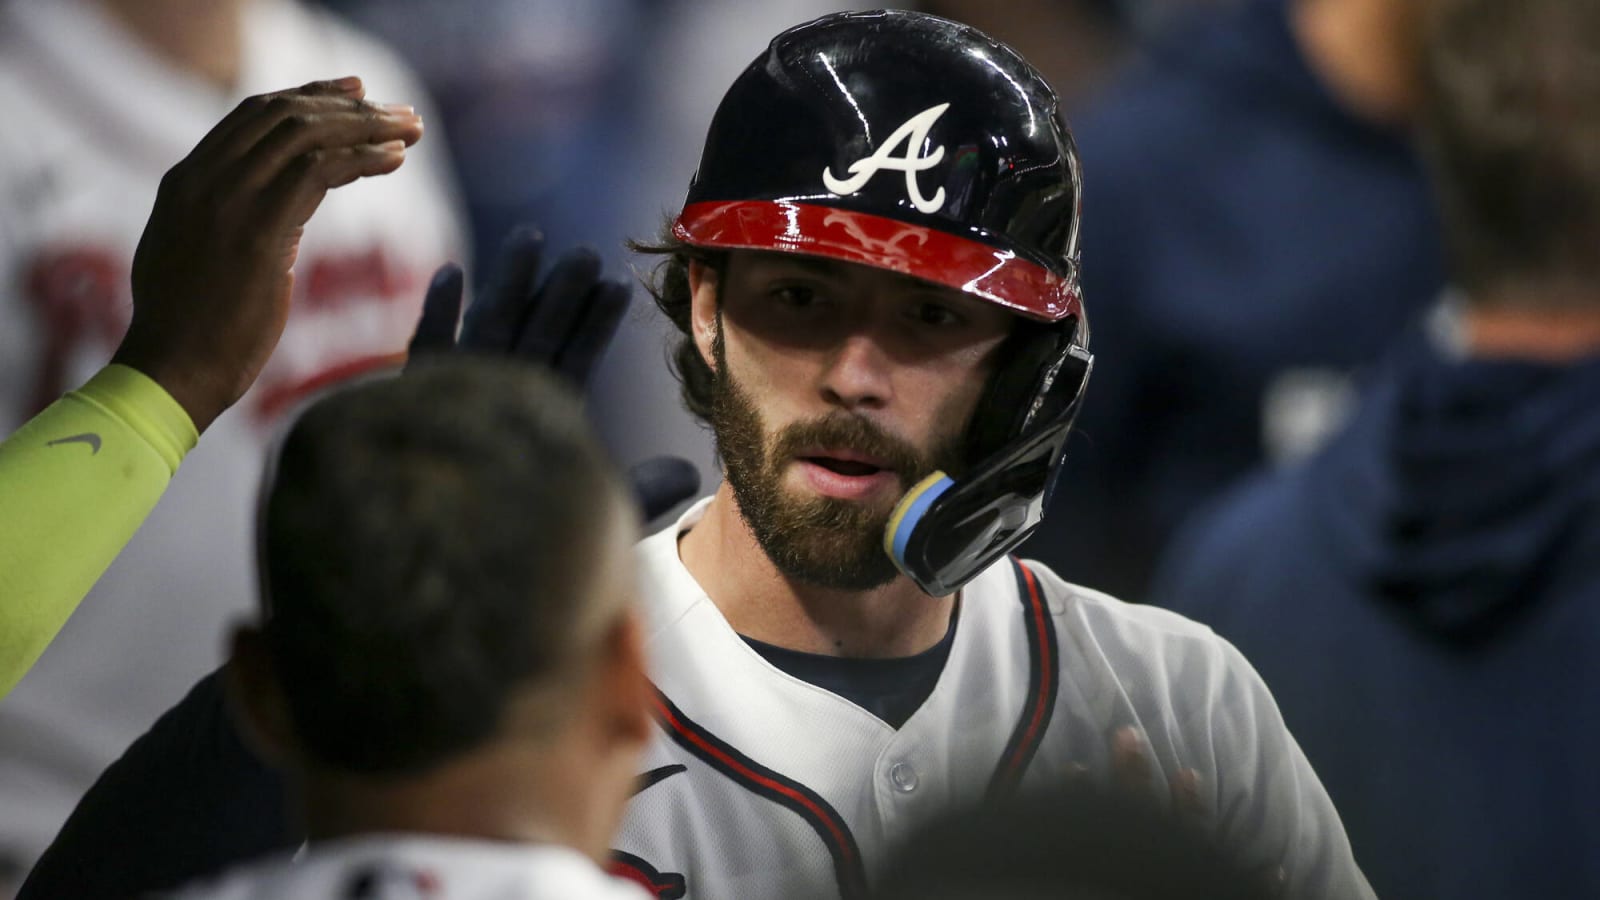 Braves free agent Dansby Swanson wins first career Gold Glove